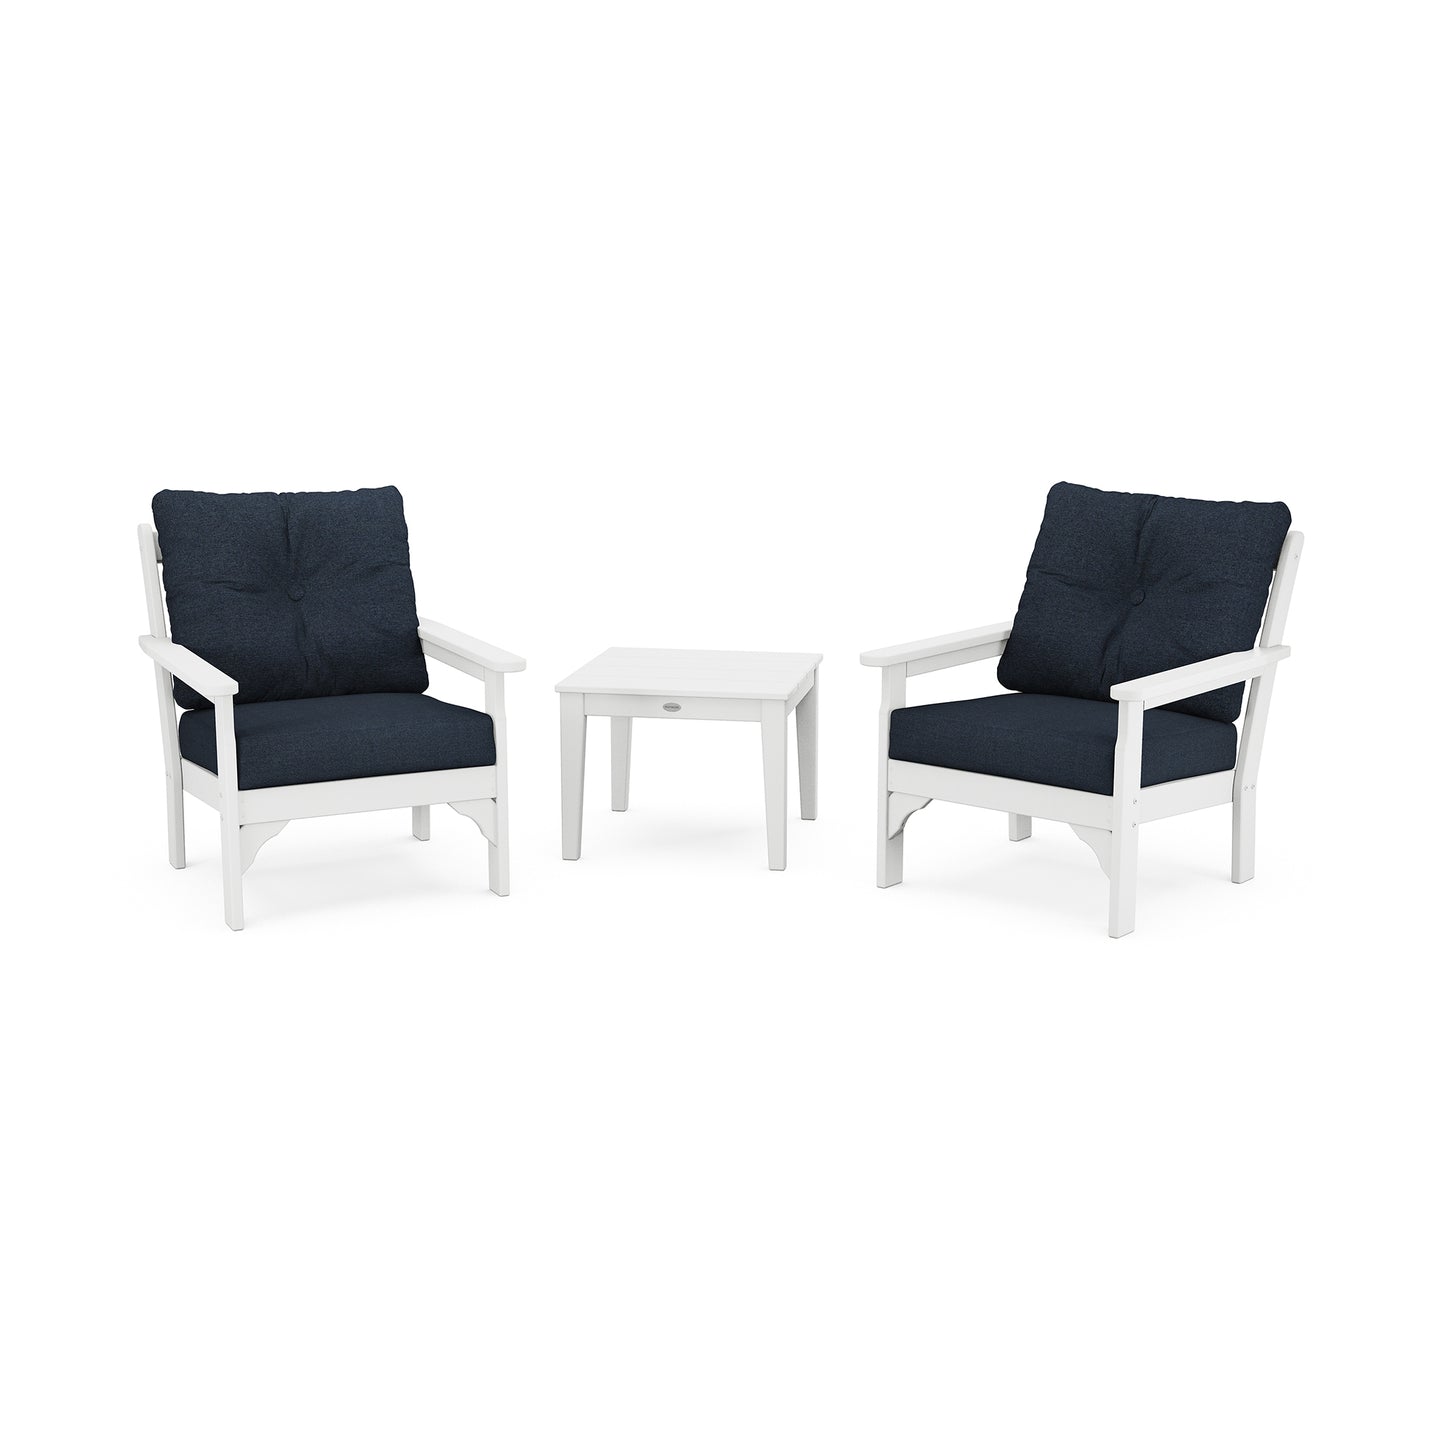 Two white outdoor chairs crafted from POLYWOOD® lumber, with deep seating cushions, and a small matching white table set against a white background from the POLYWOOD Vineyard 3-Piece Deep Seating Set.